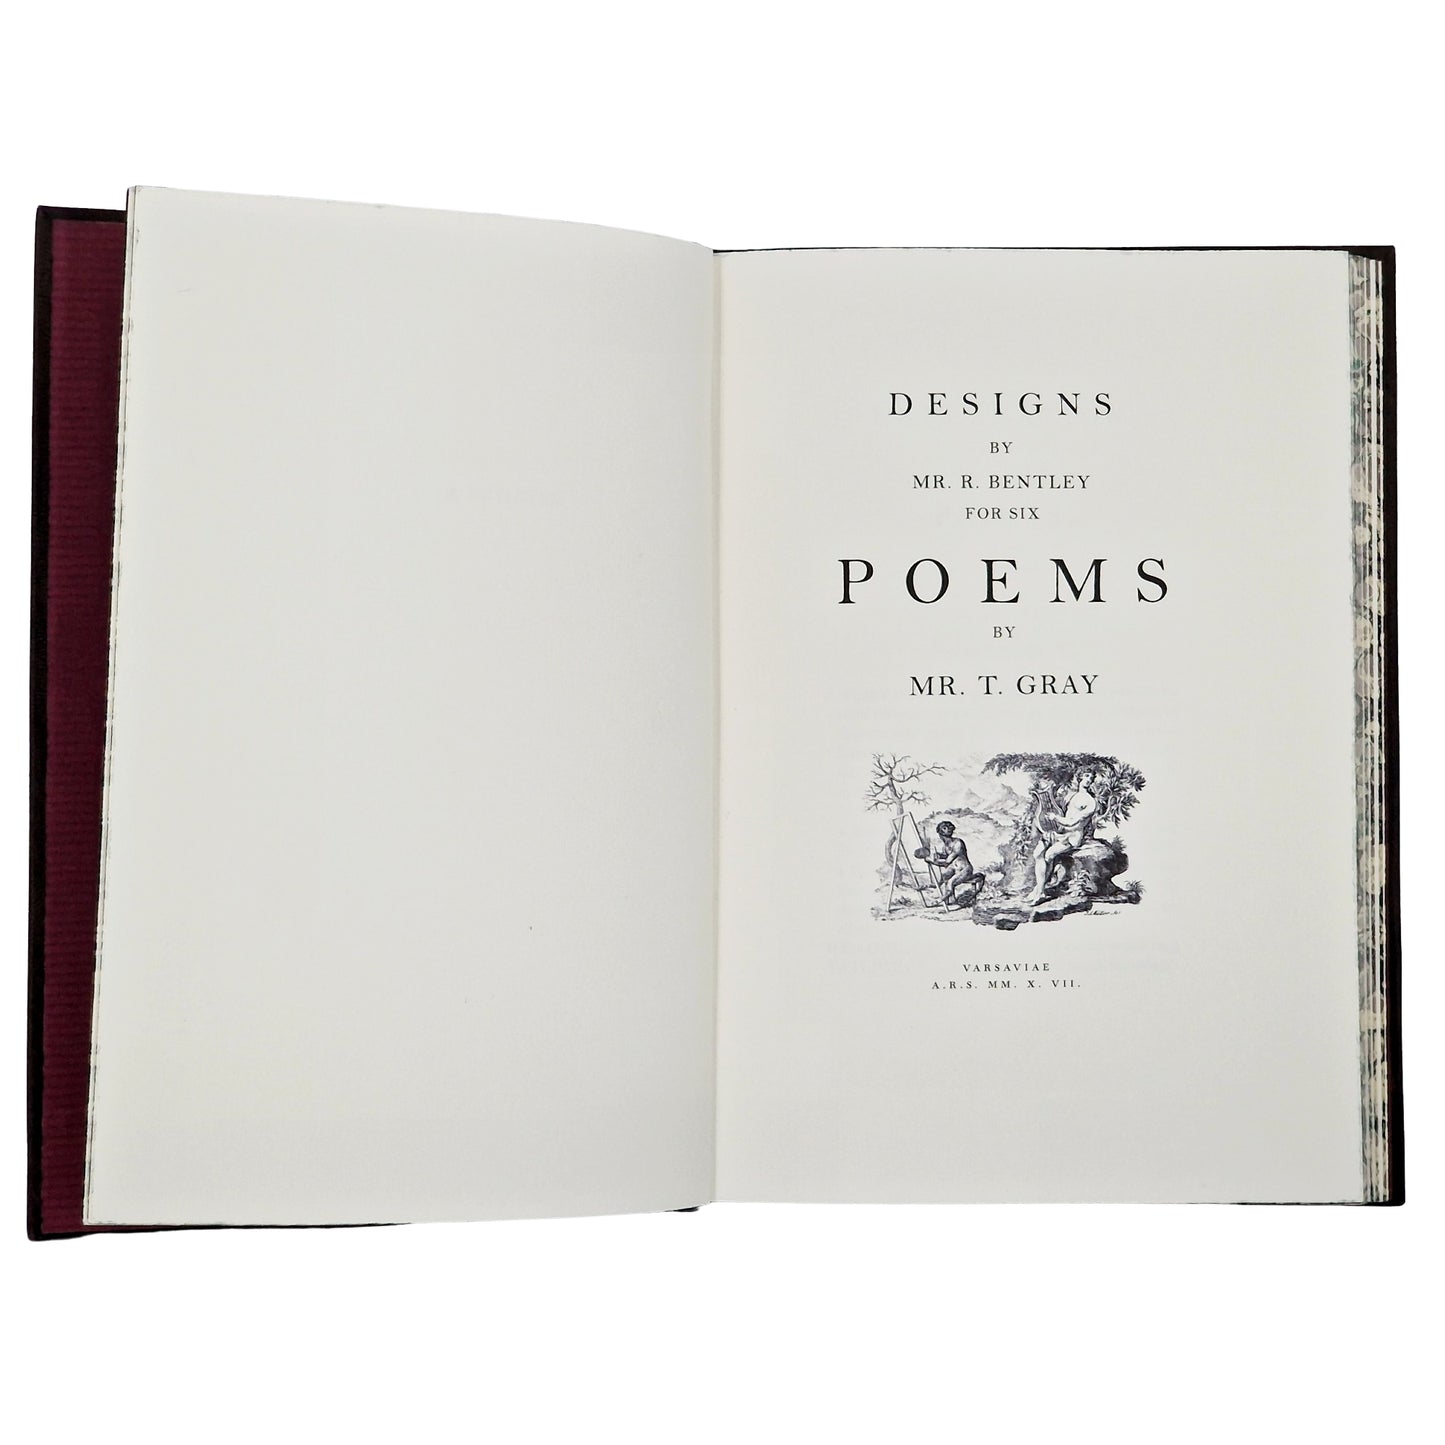 Designs by Mr. Bentley for Six Poems by Mr. T. Gray